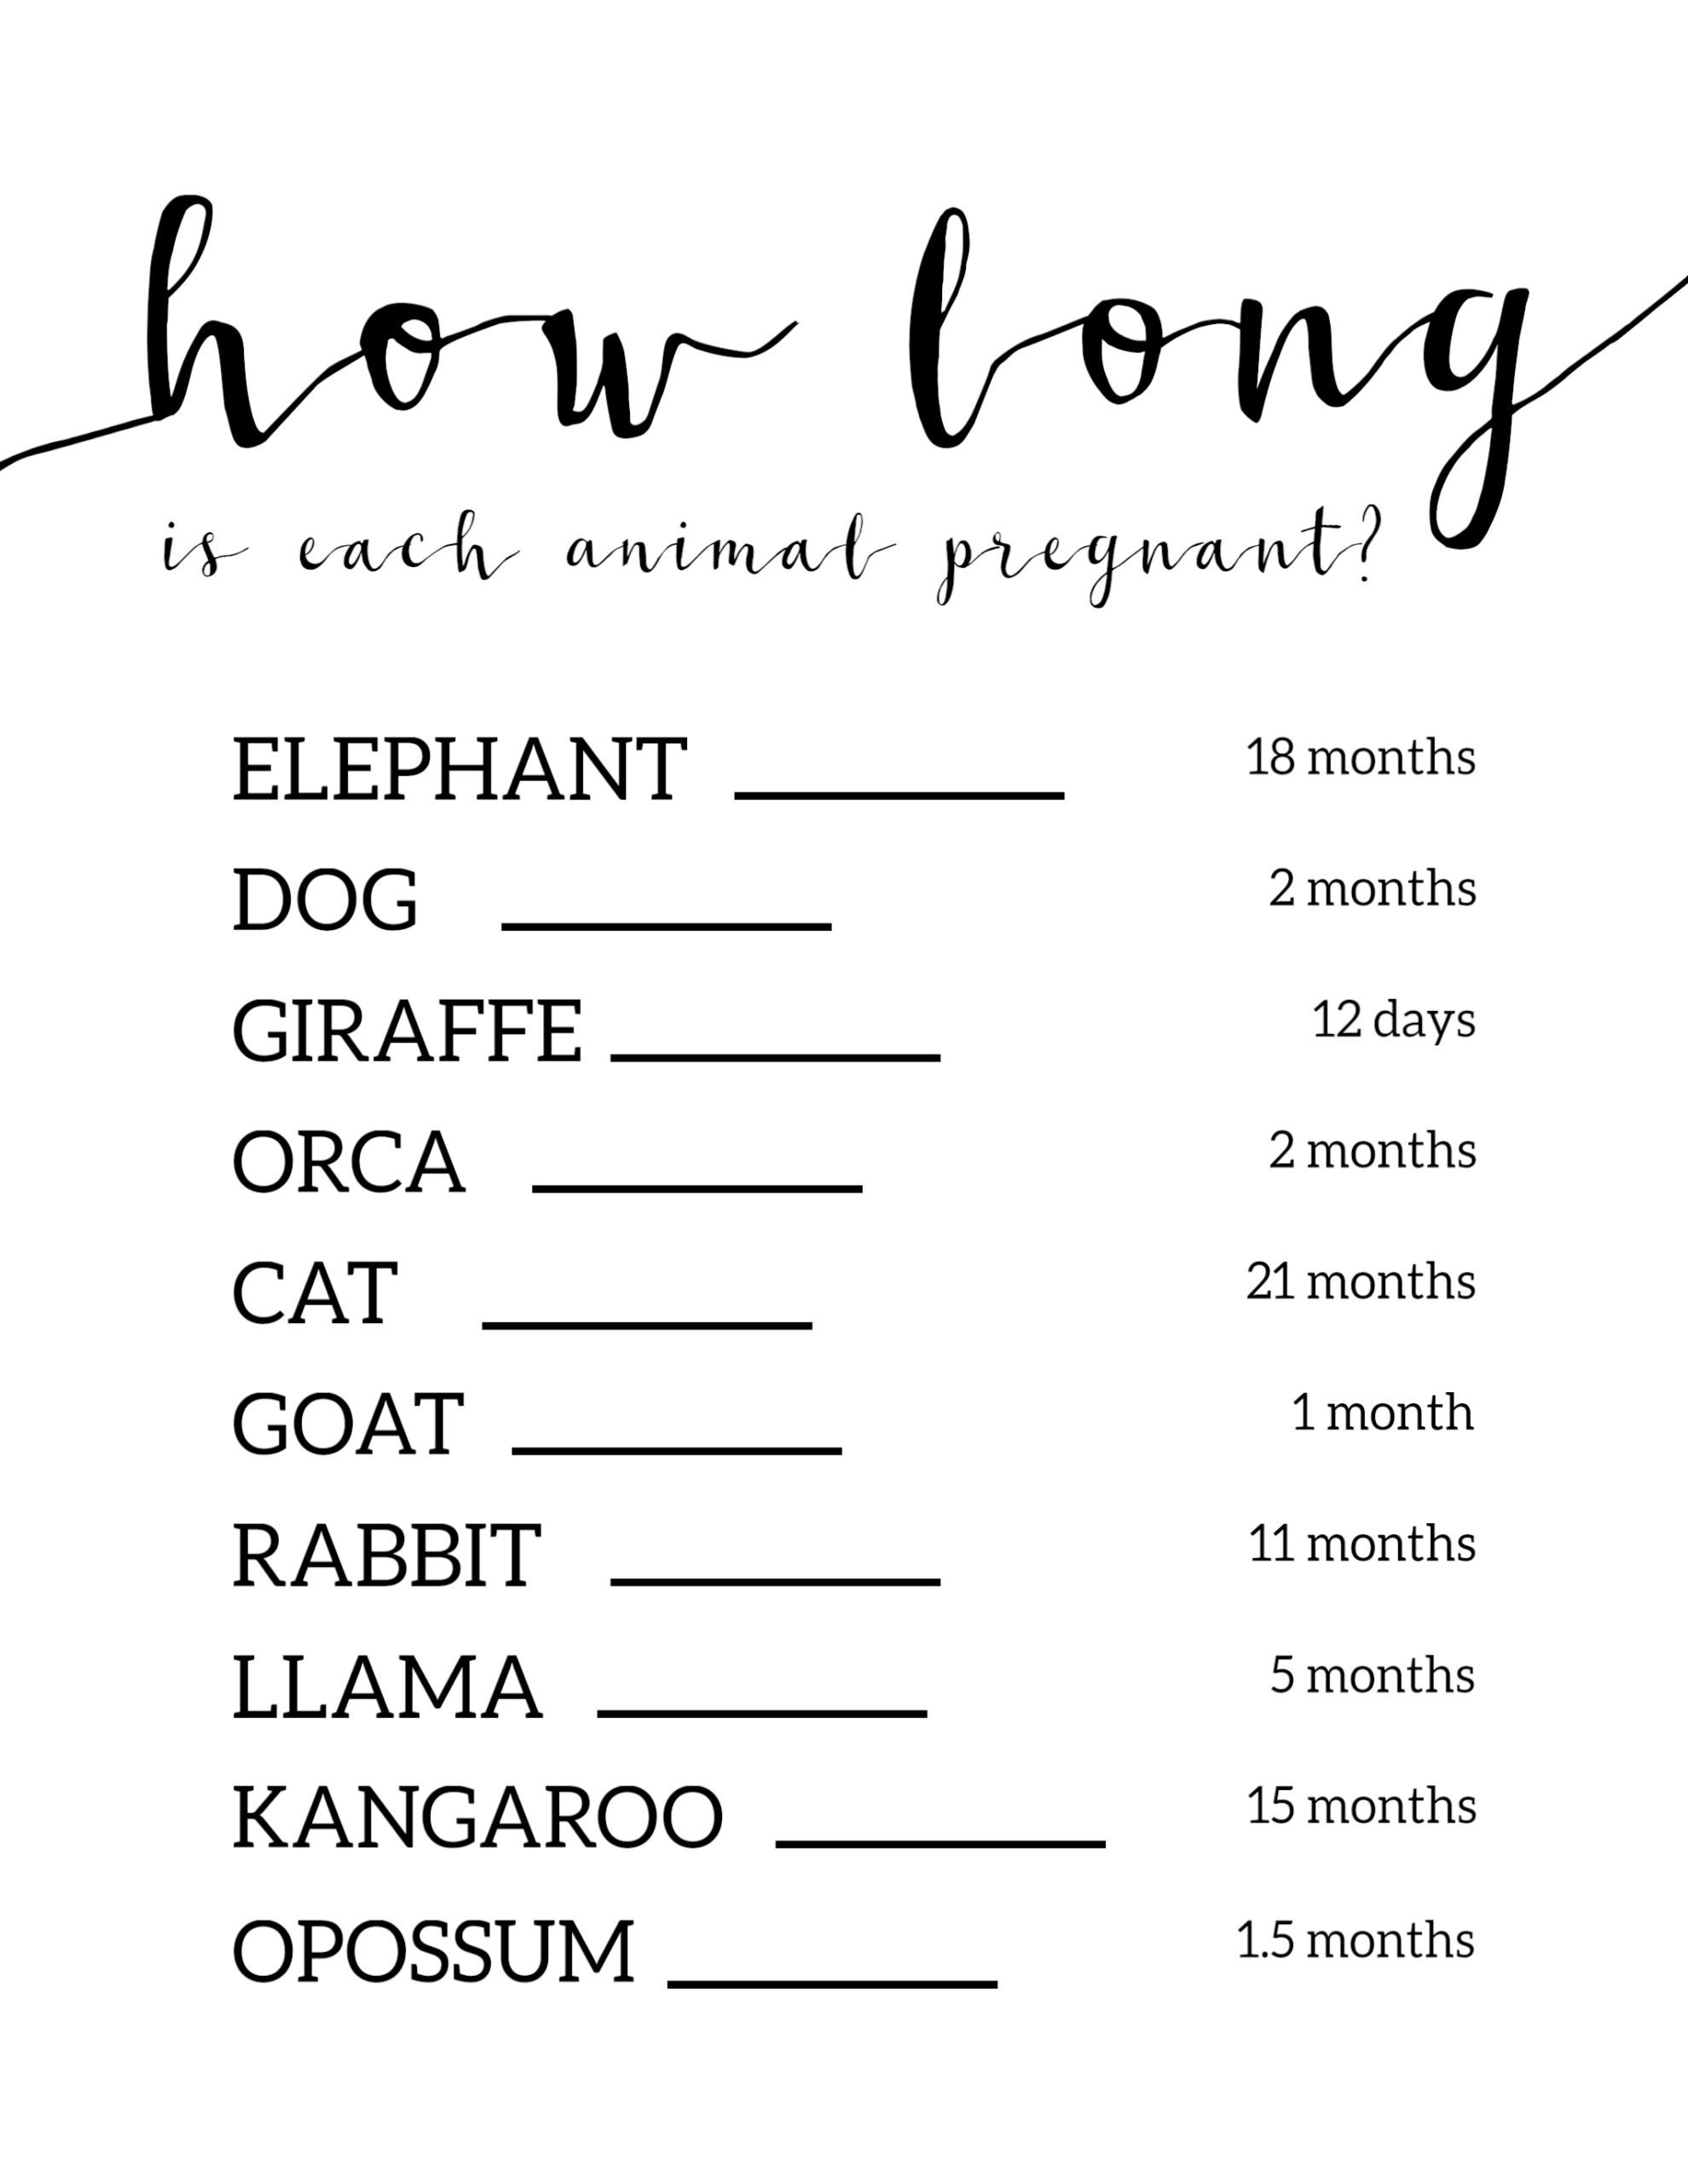 Free Baby Shower Games Printable {Animal Pregnancies} - Paper Trail - Free Printable Baby Shower Games With Answers